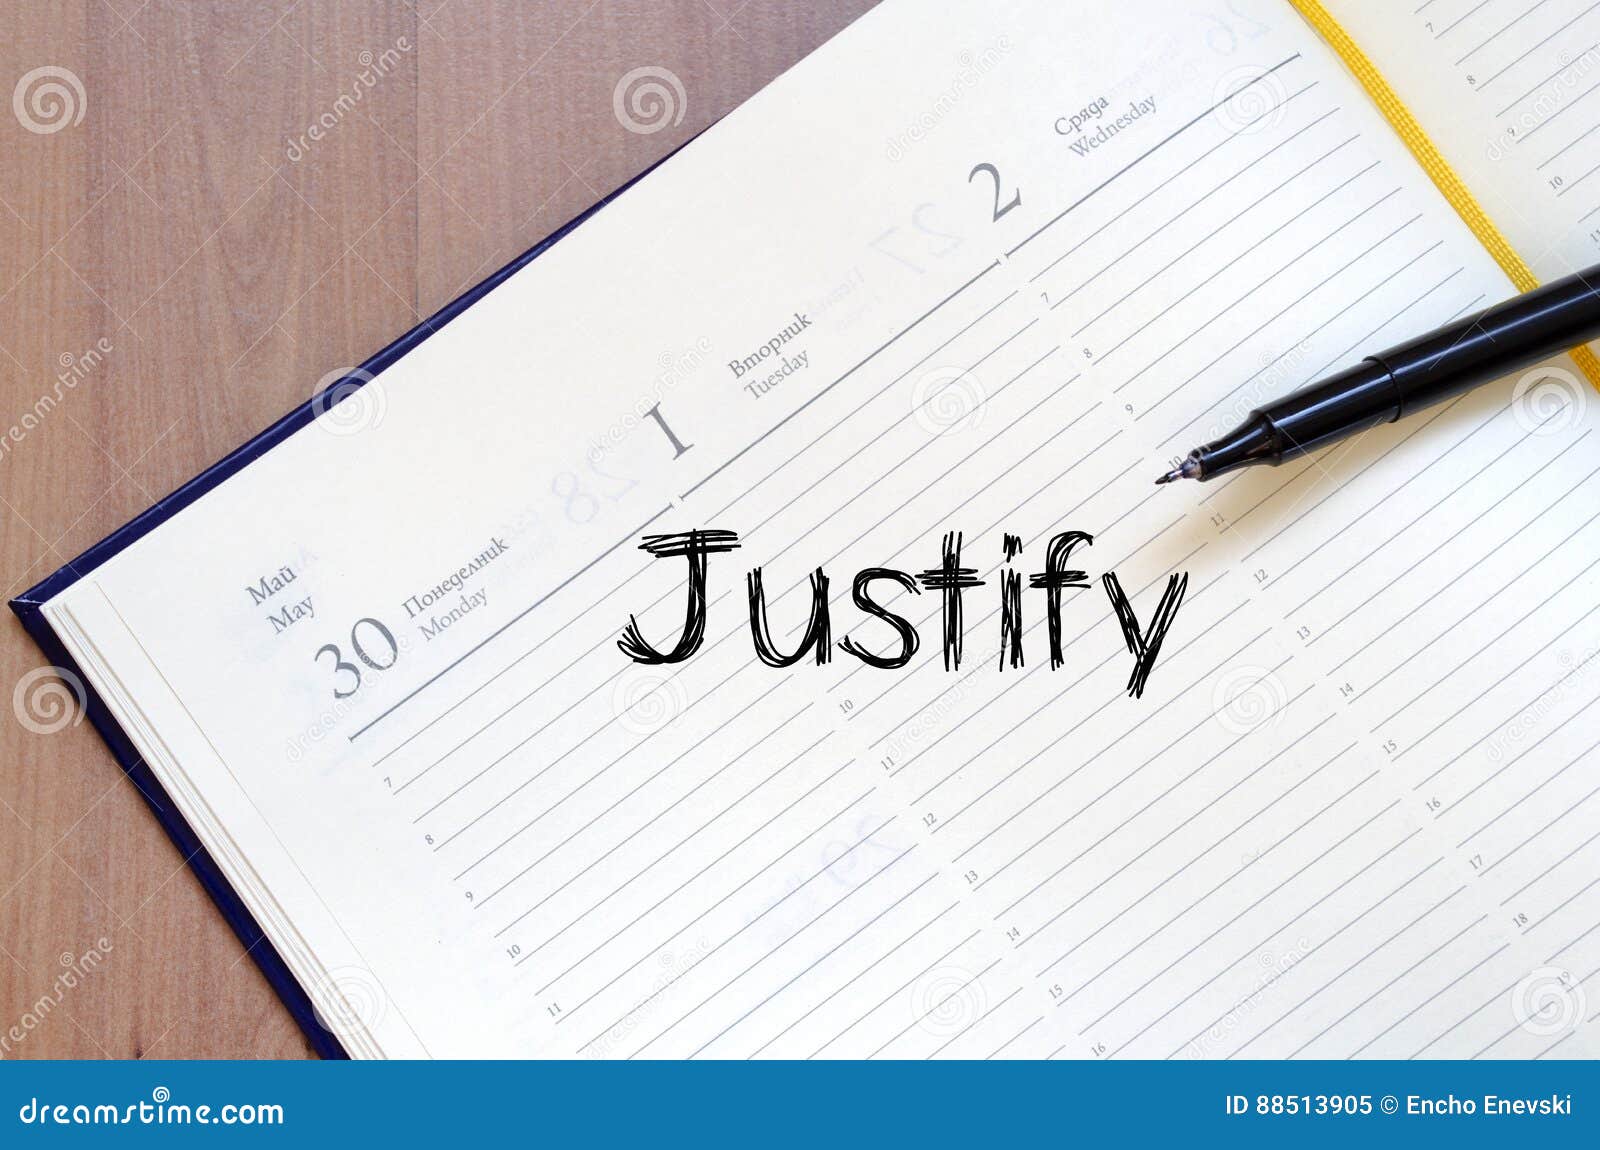 justify write on notebook